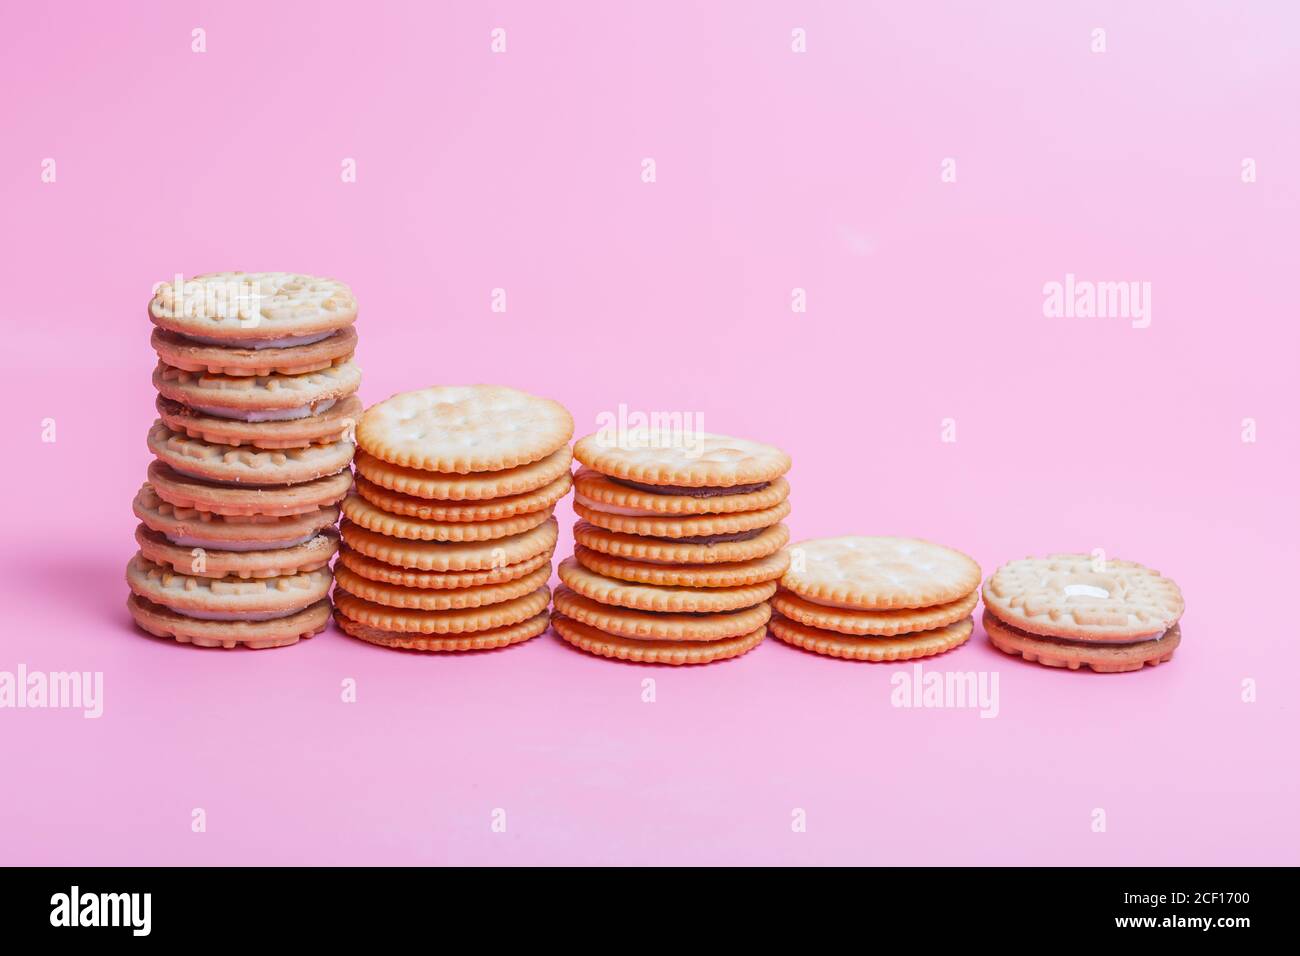 Cream sandwich biscuits on pink background Stock Photo